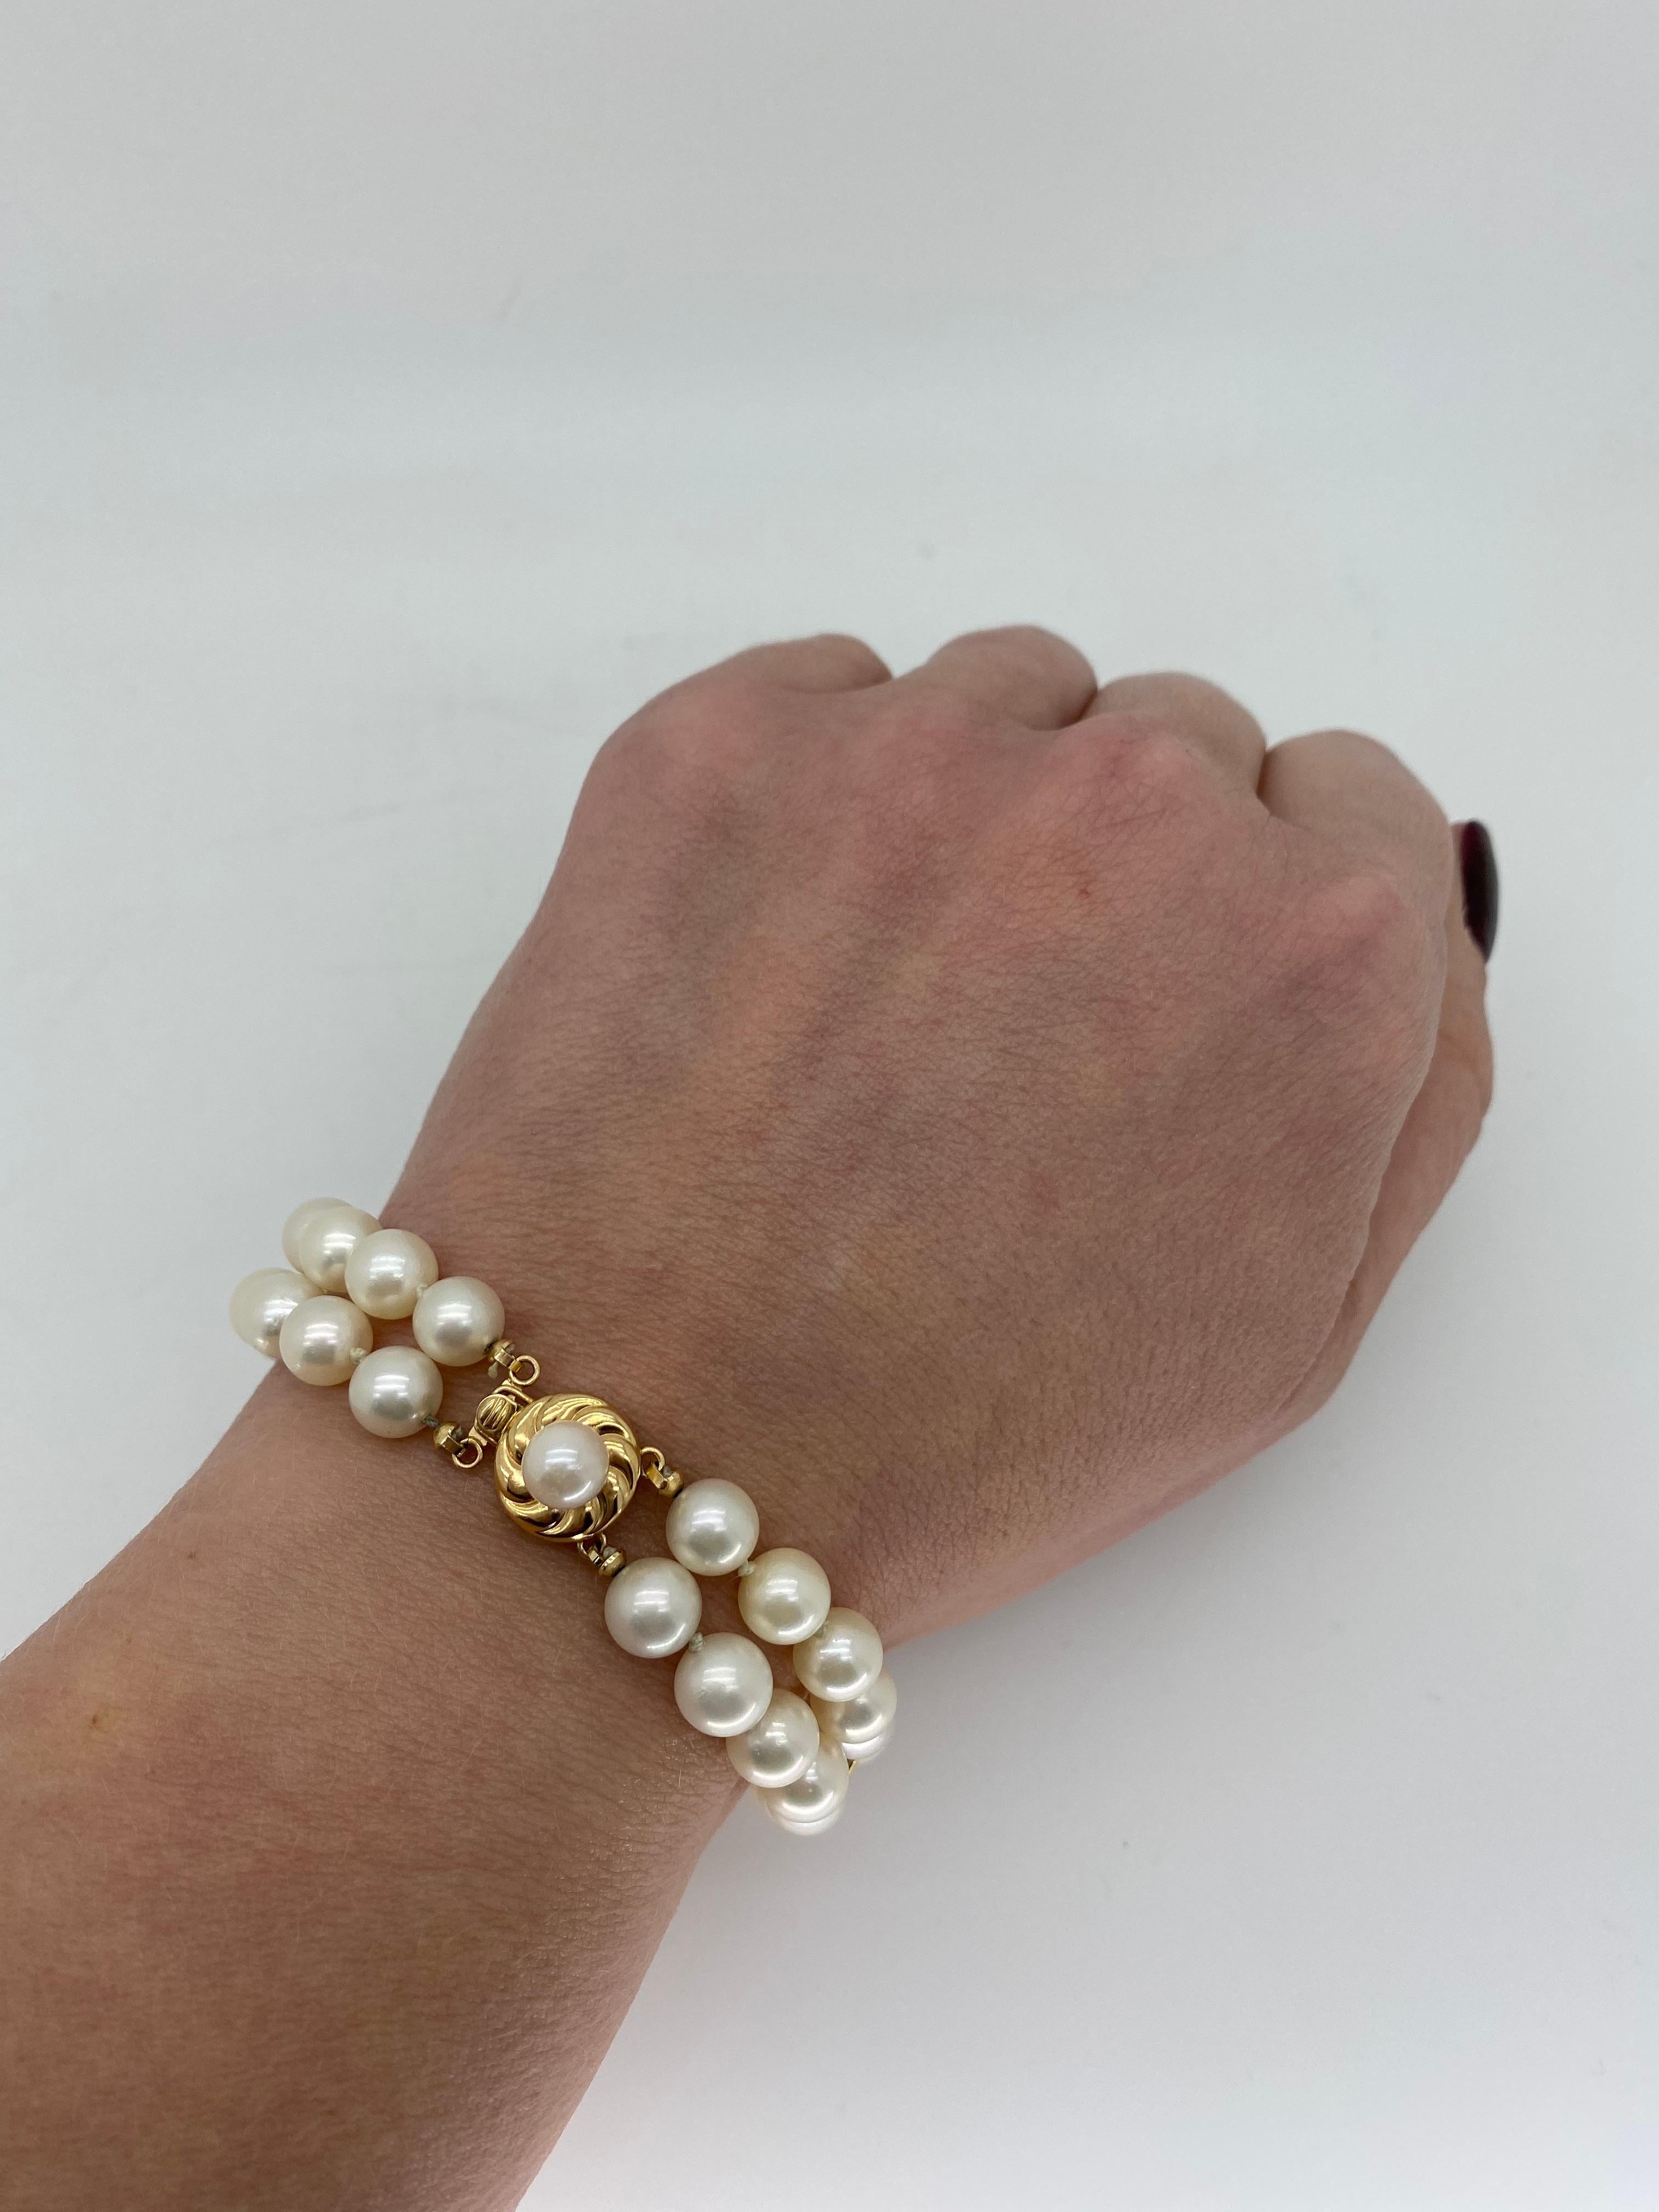 Classic double strand pearl bracelet with 14k yellow gold clasp.

Gemstone: Pearl
Gemstone Carat Weight: Approximately 7.25mm Round Pearls
Metal: 14K Yellow Gold
Marked/Tested: Stamped “14K